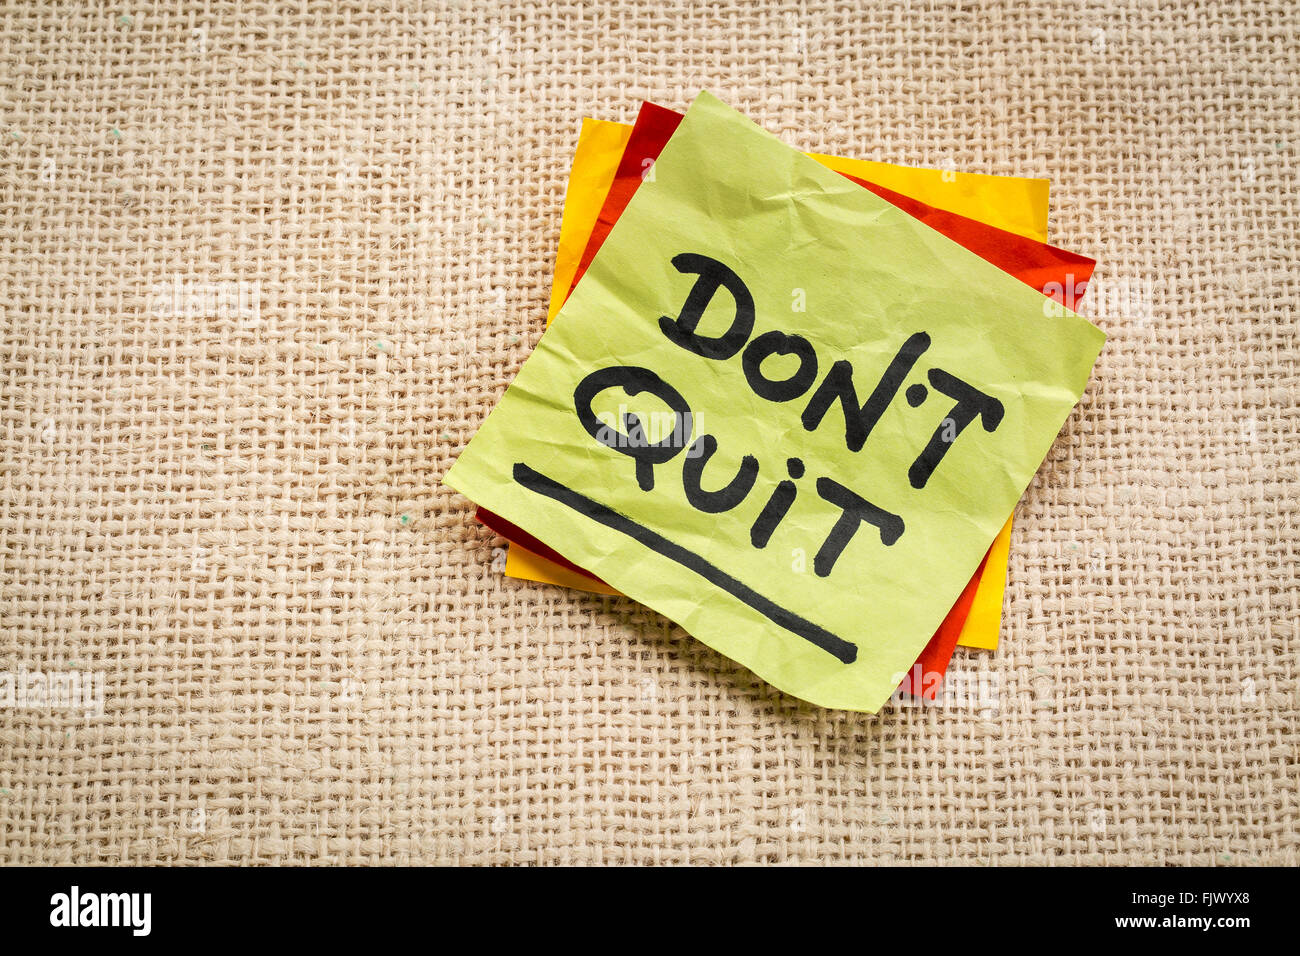 Do not quit advice or reminder on a  sticky note against burlap canvas Stock Photo